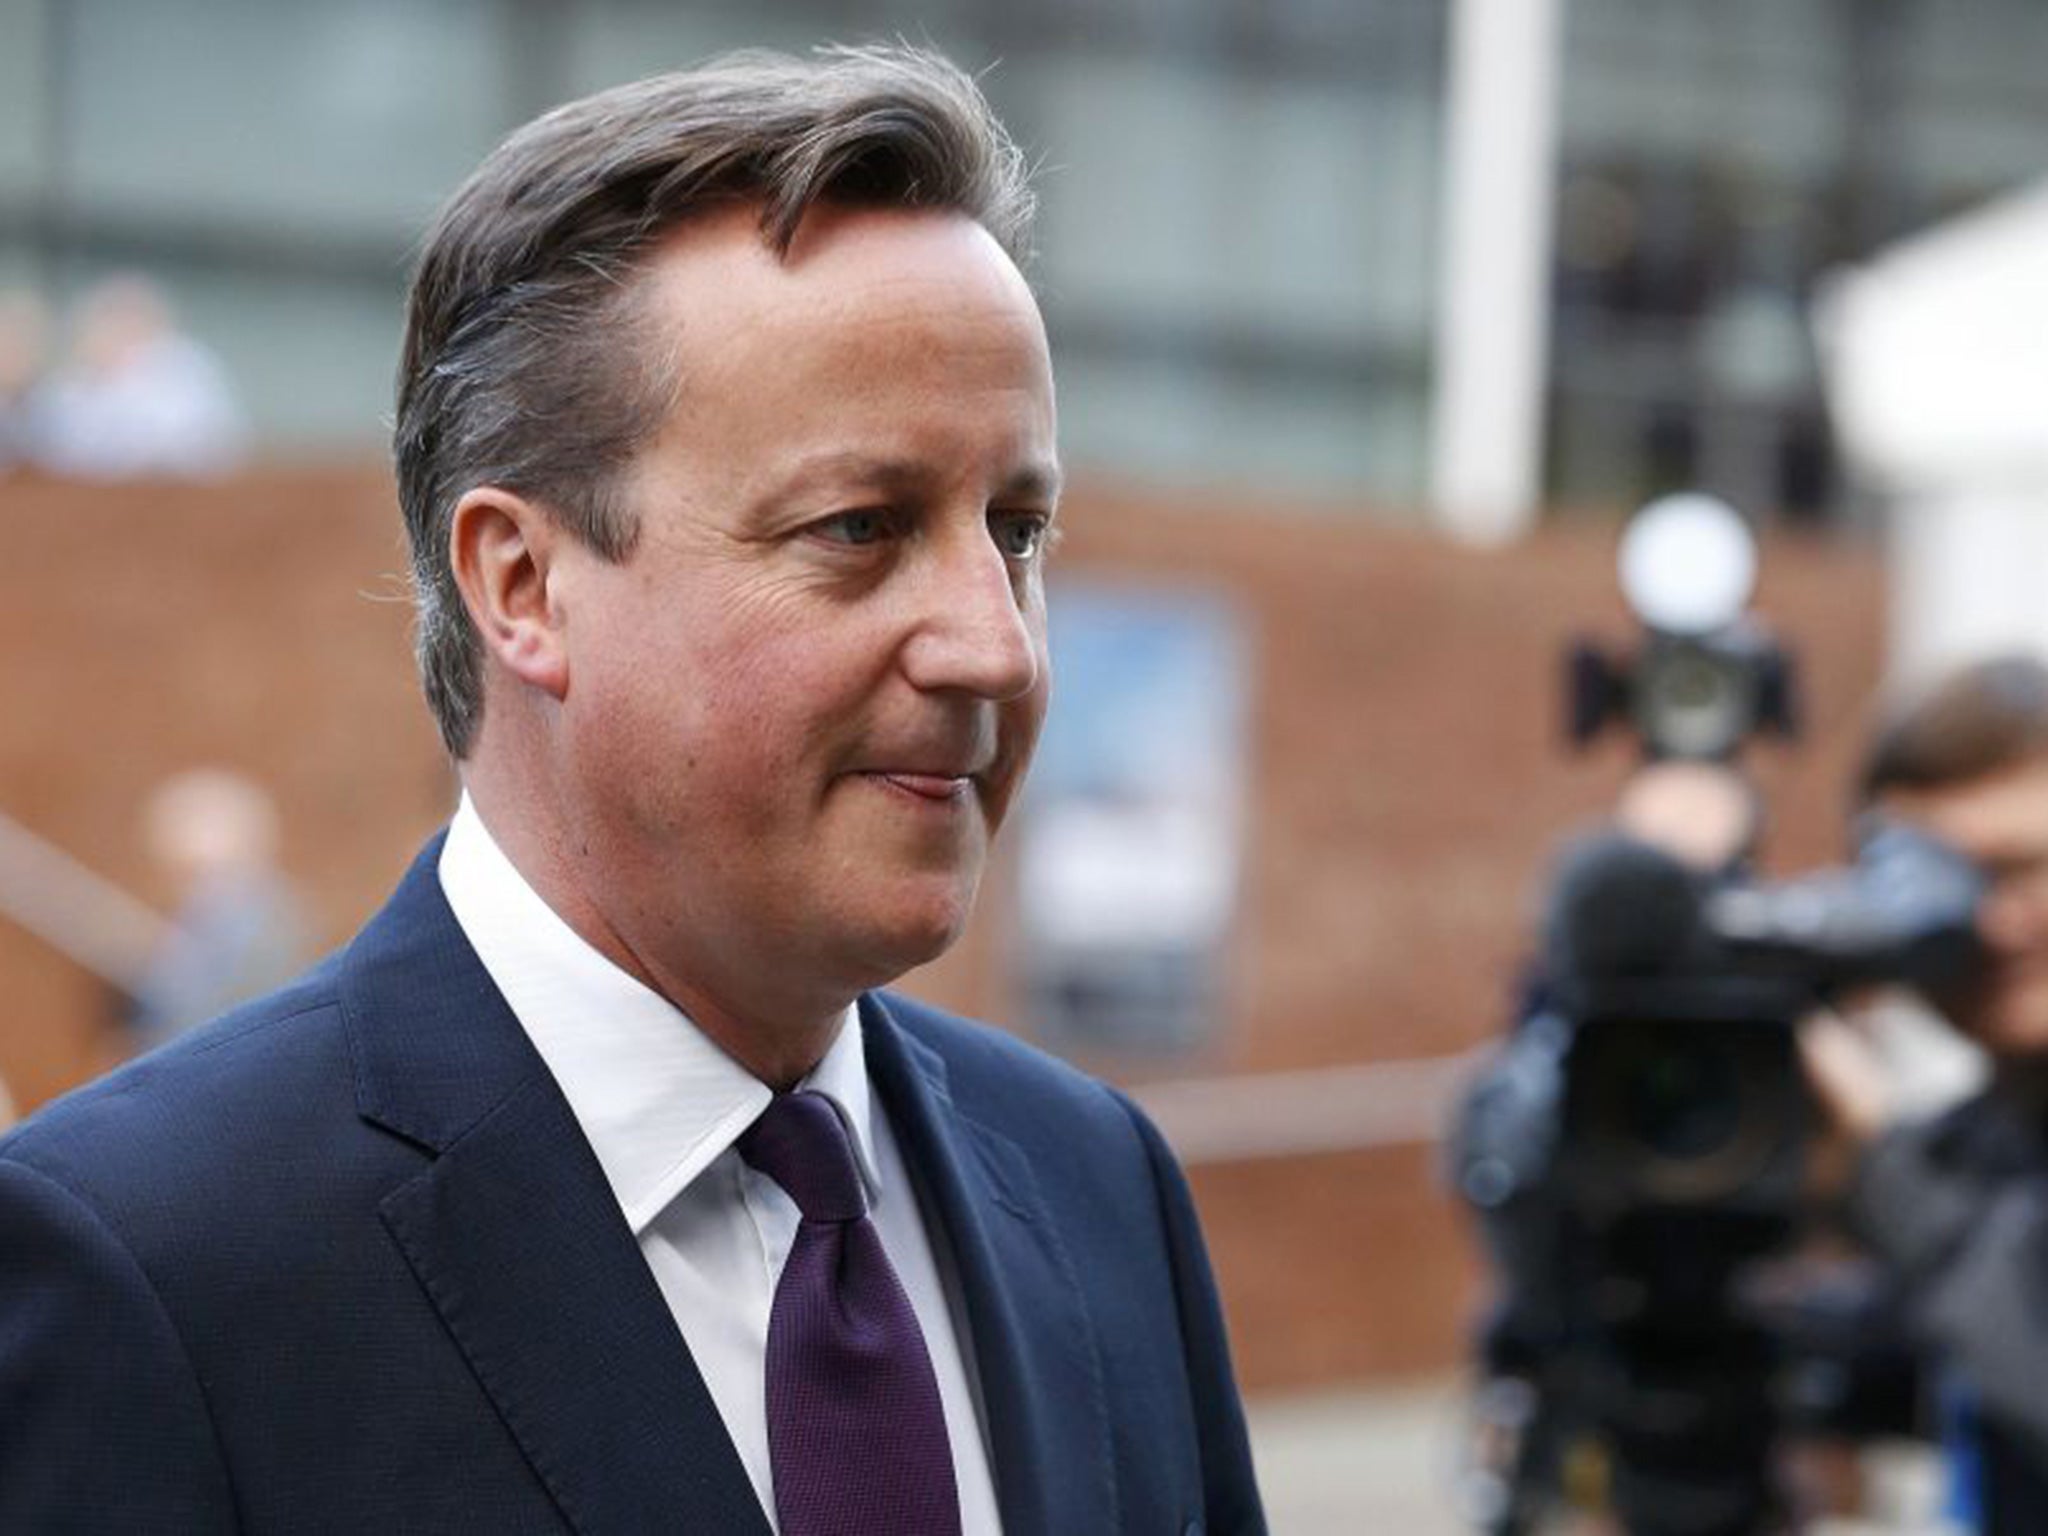 David Cameron leaves Manchester Central with MP for Eastbourne Caroline Ansell